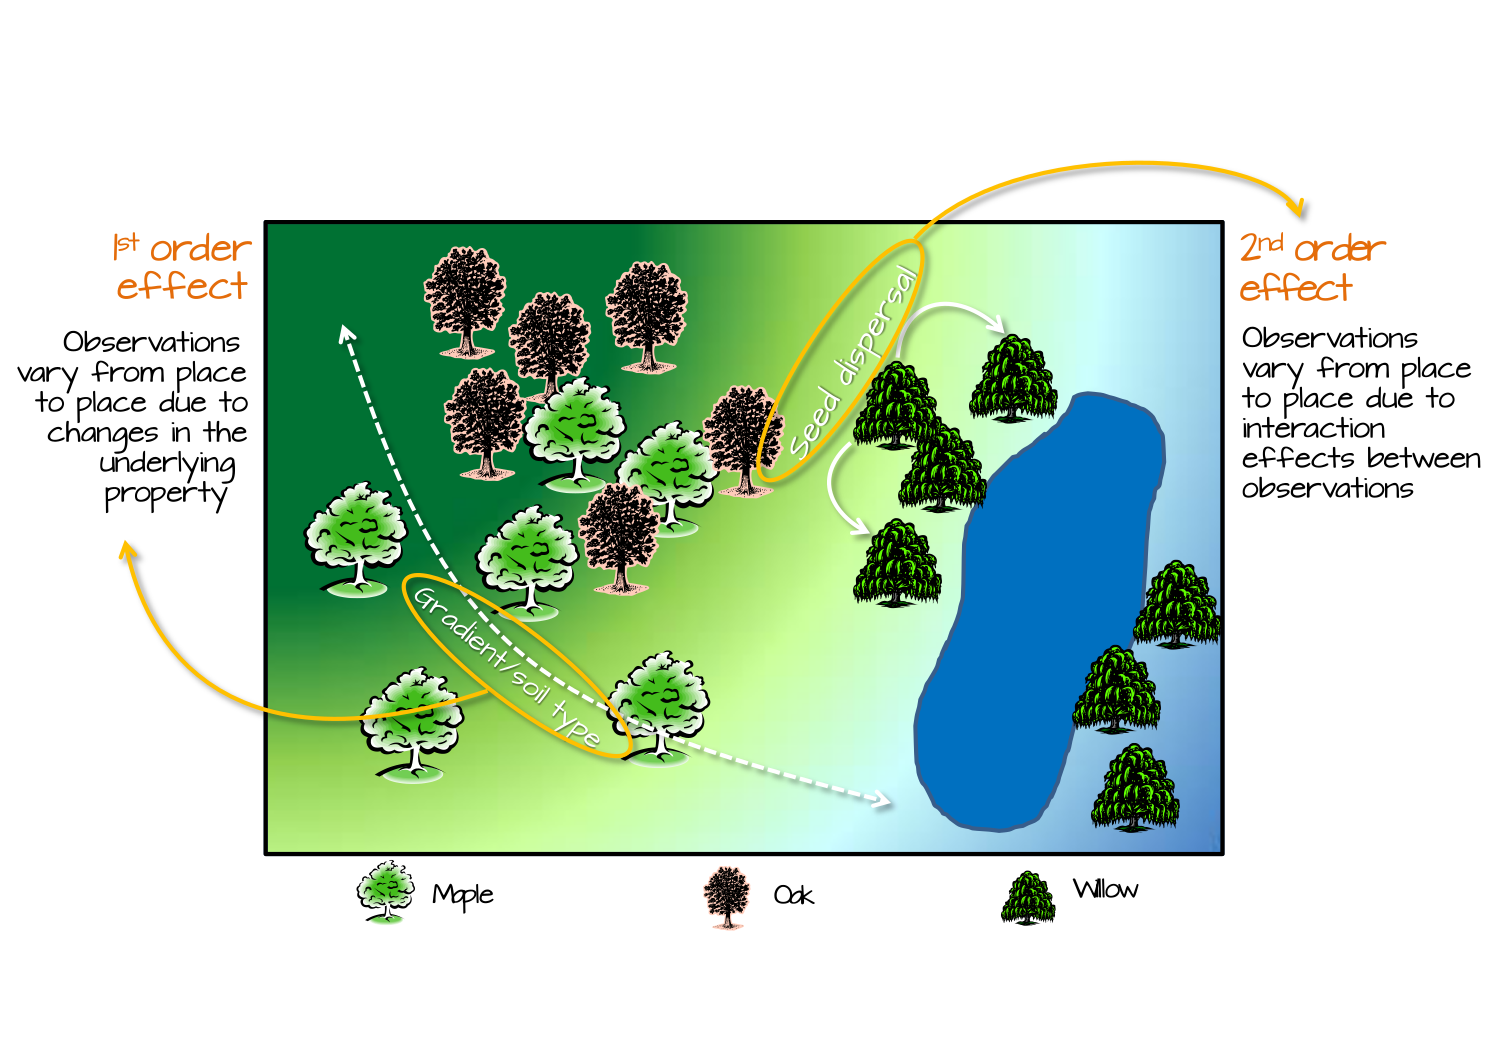 Tree distribution can be influenced by 1^st^ order effects such as elevation gradient or spatial distribution of soil characteristics; this, in turn, changes the  tree density distribution across the study area. Tree distribution can also be influenced by 2^nd^ order effects such as seed dispersal processes where the process is independent of location and, instead, dependent on the presence of other trees.